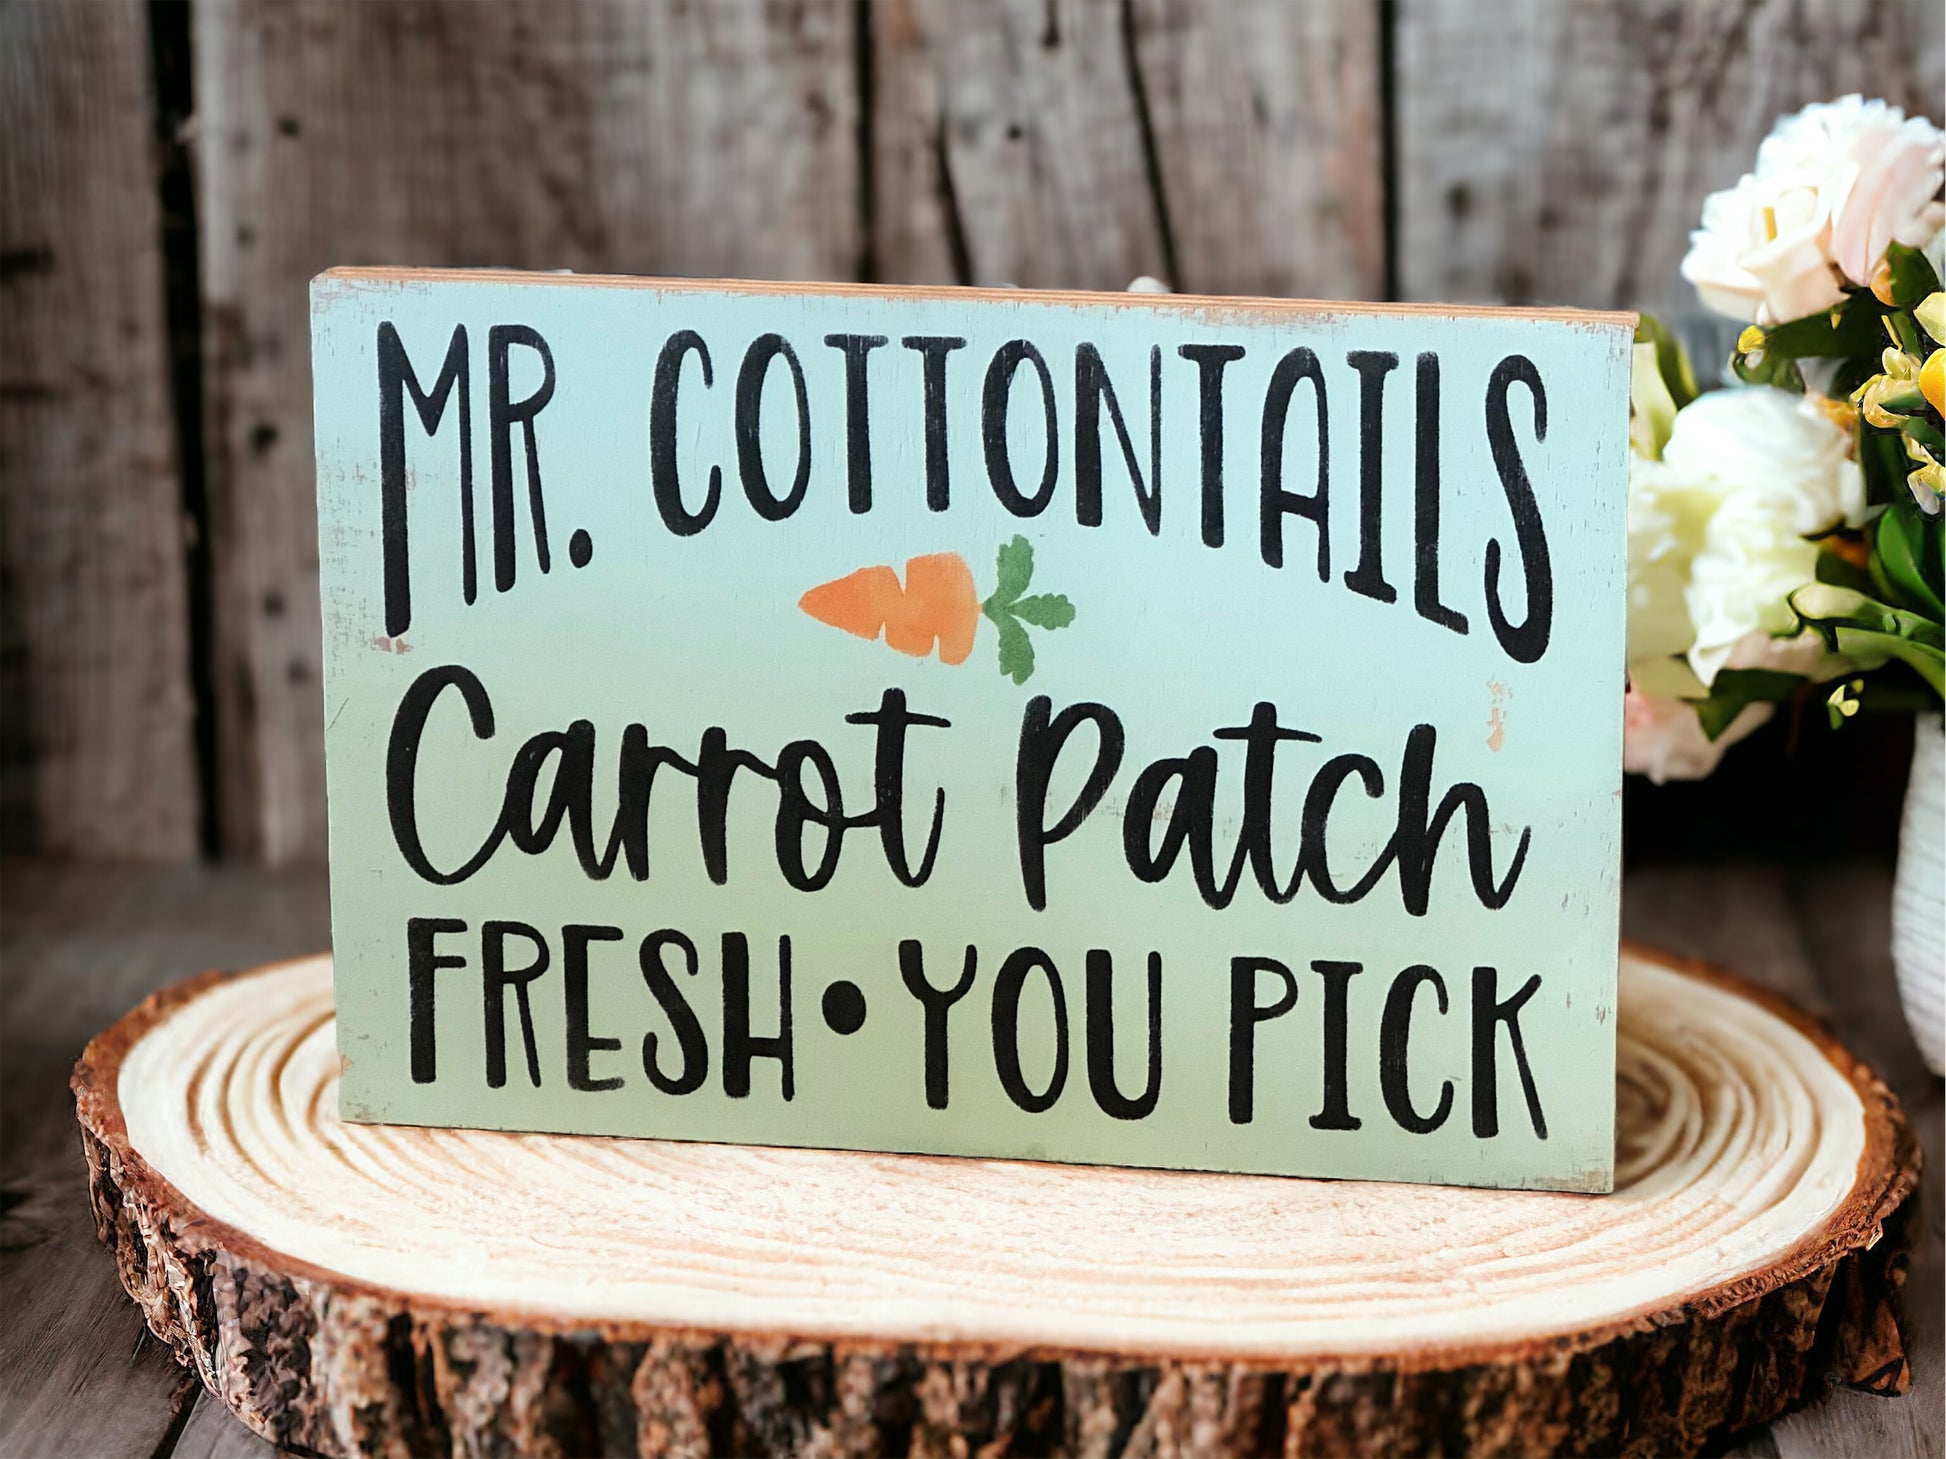 "Carrot patch" wood sign